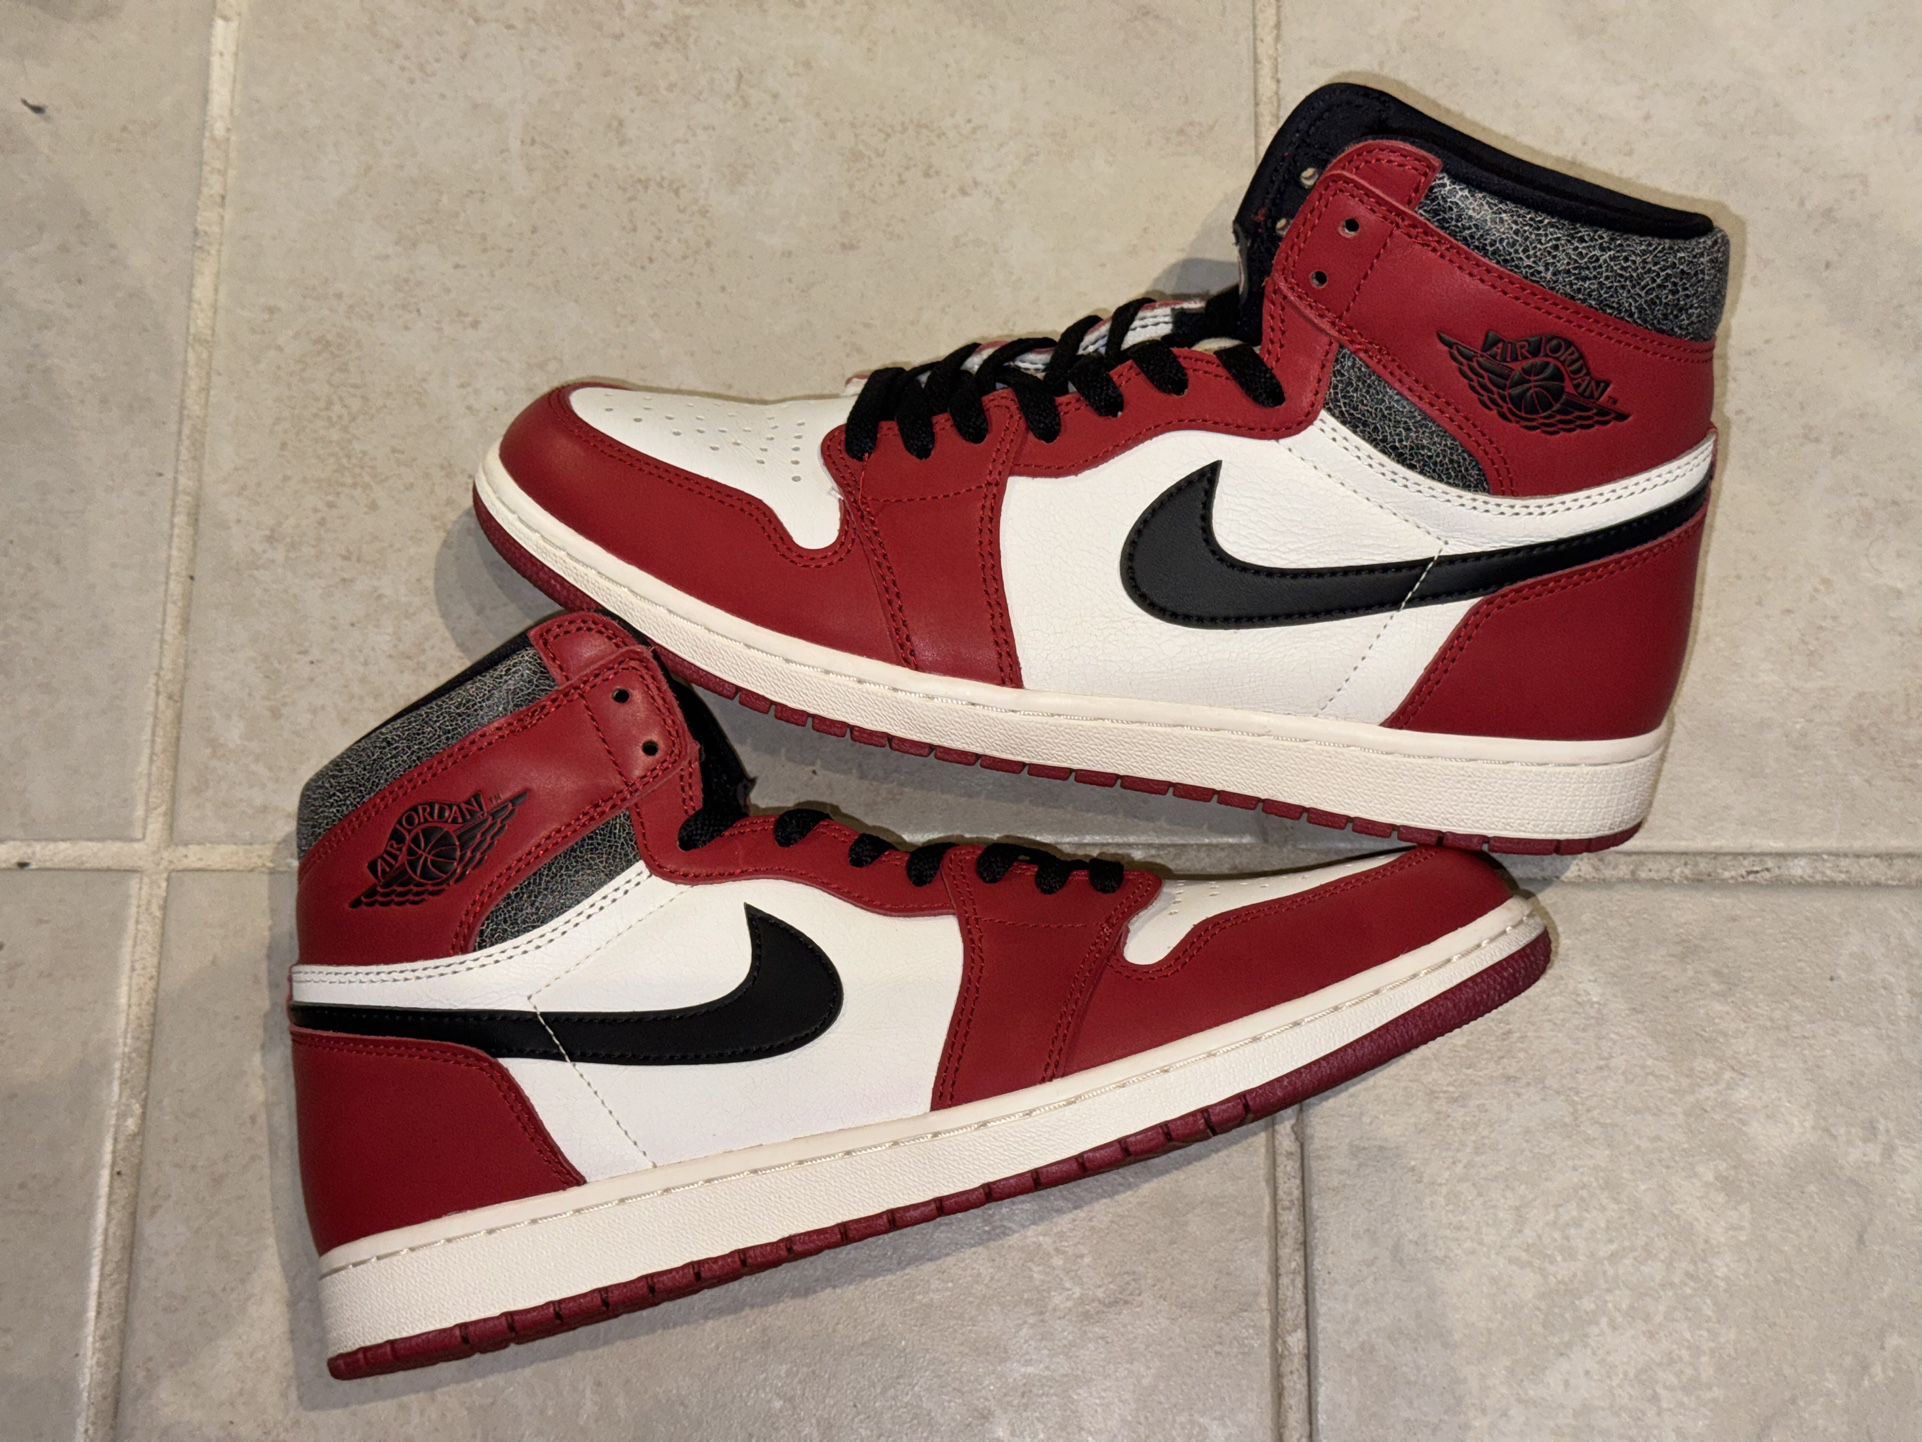 jordan 1 lost and found size 11.5 